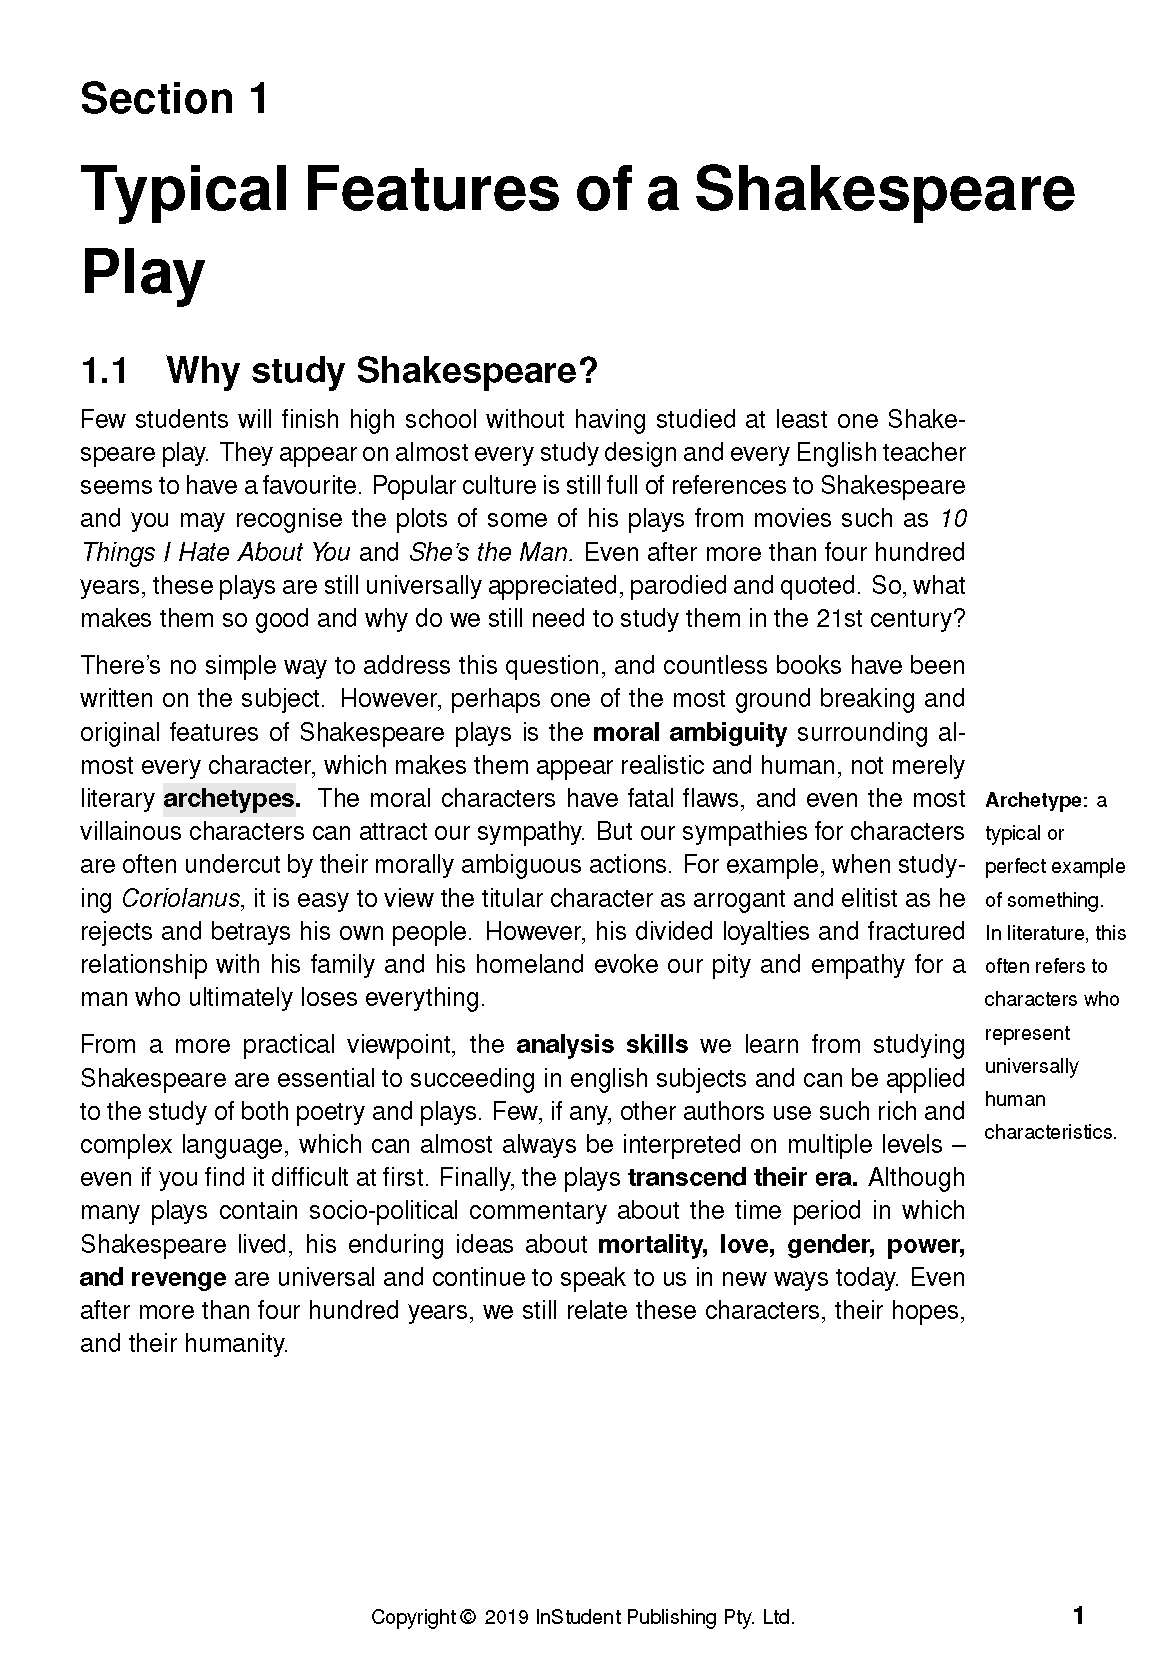 The ATAR Notes Analysis Guides: How To Analyse Shakespeare